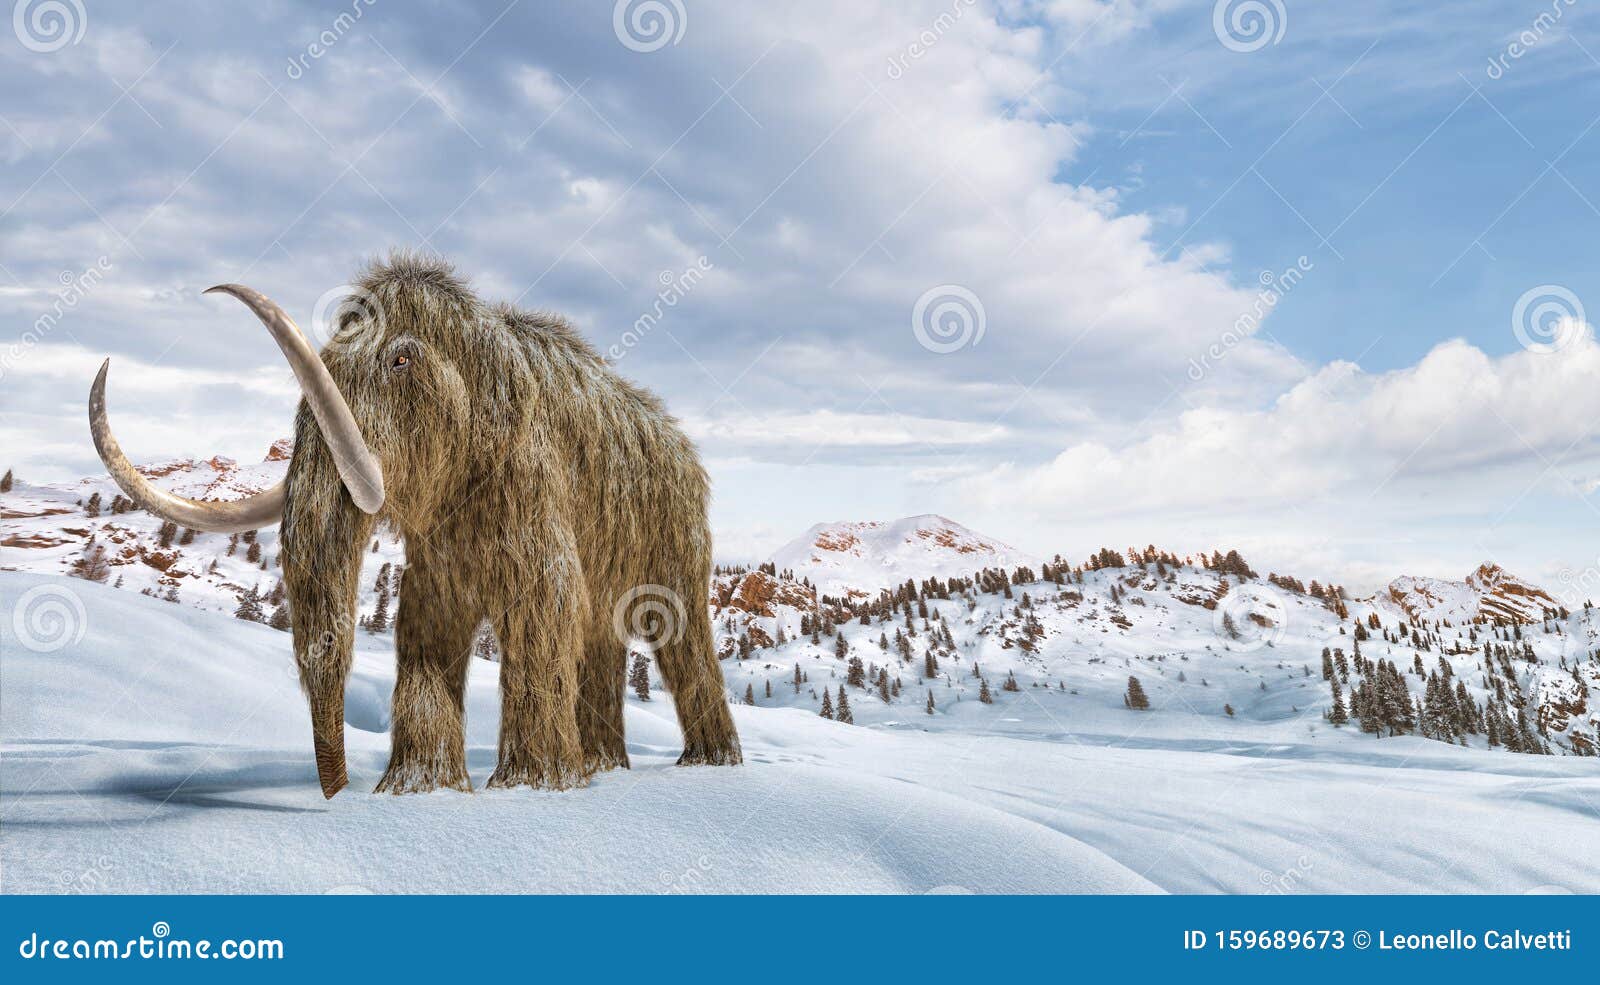 woolly mammoth scene in environment with snow. realistic 3d 